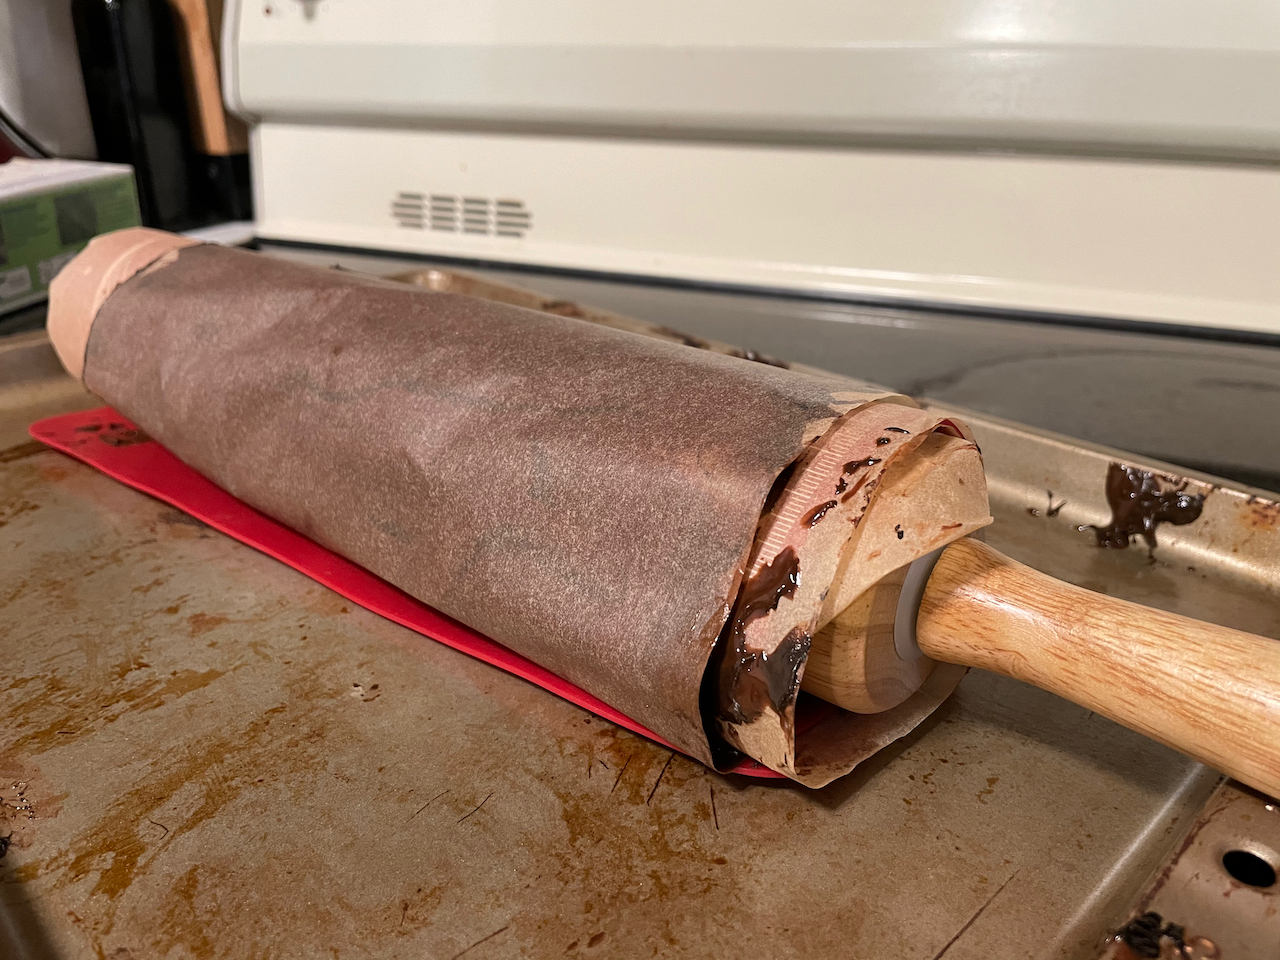 Parchment paper with melted chocolate wrapped around a wooden rolling pin on top of a cookie sheet.